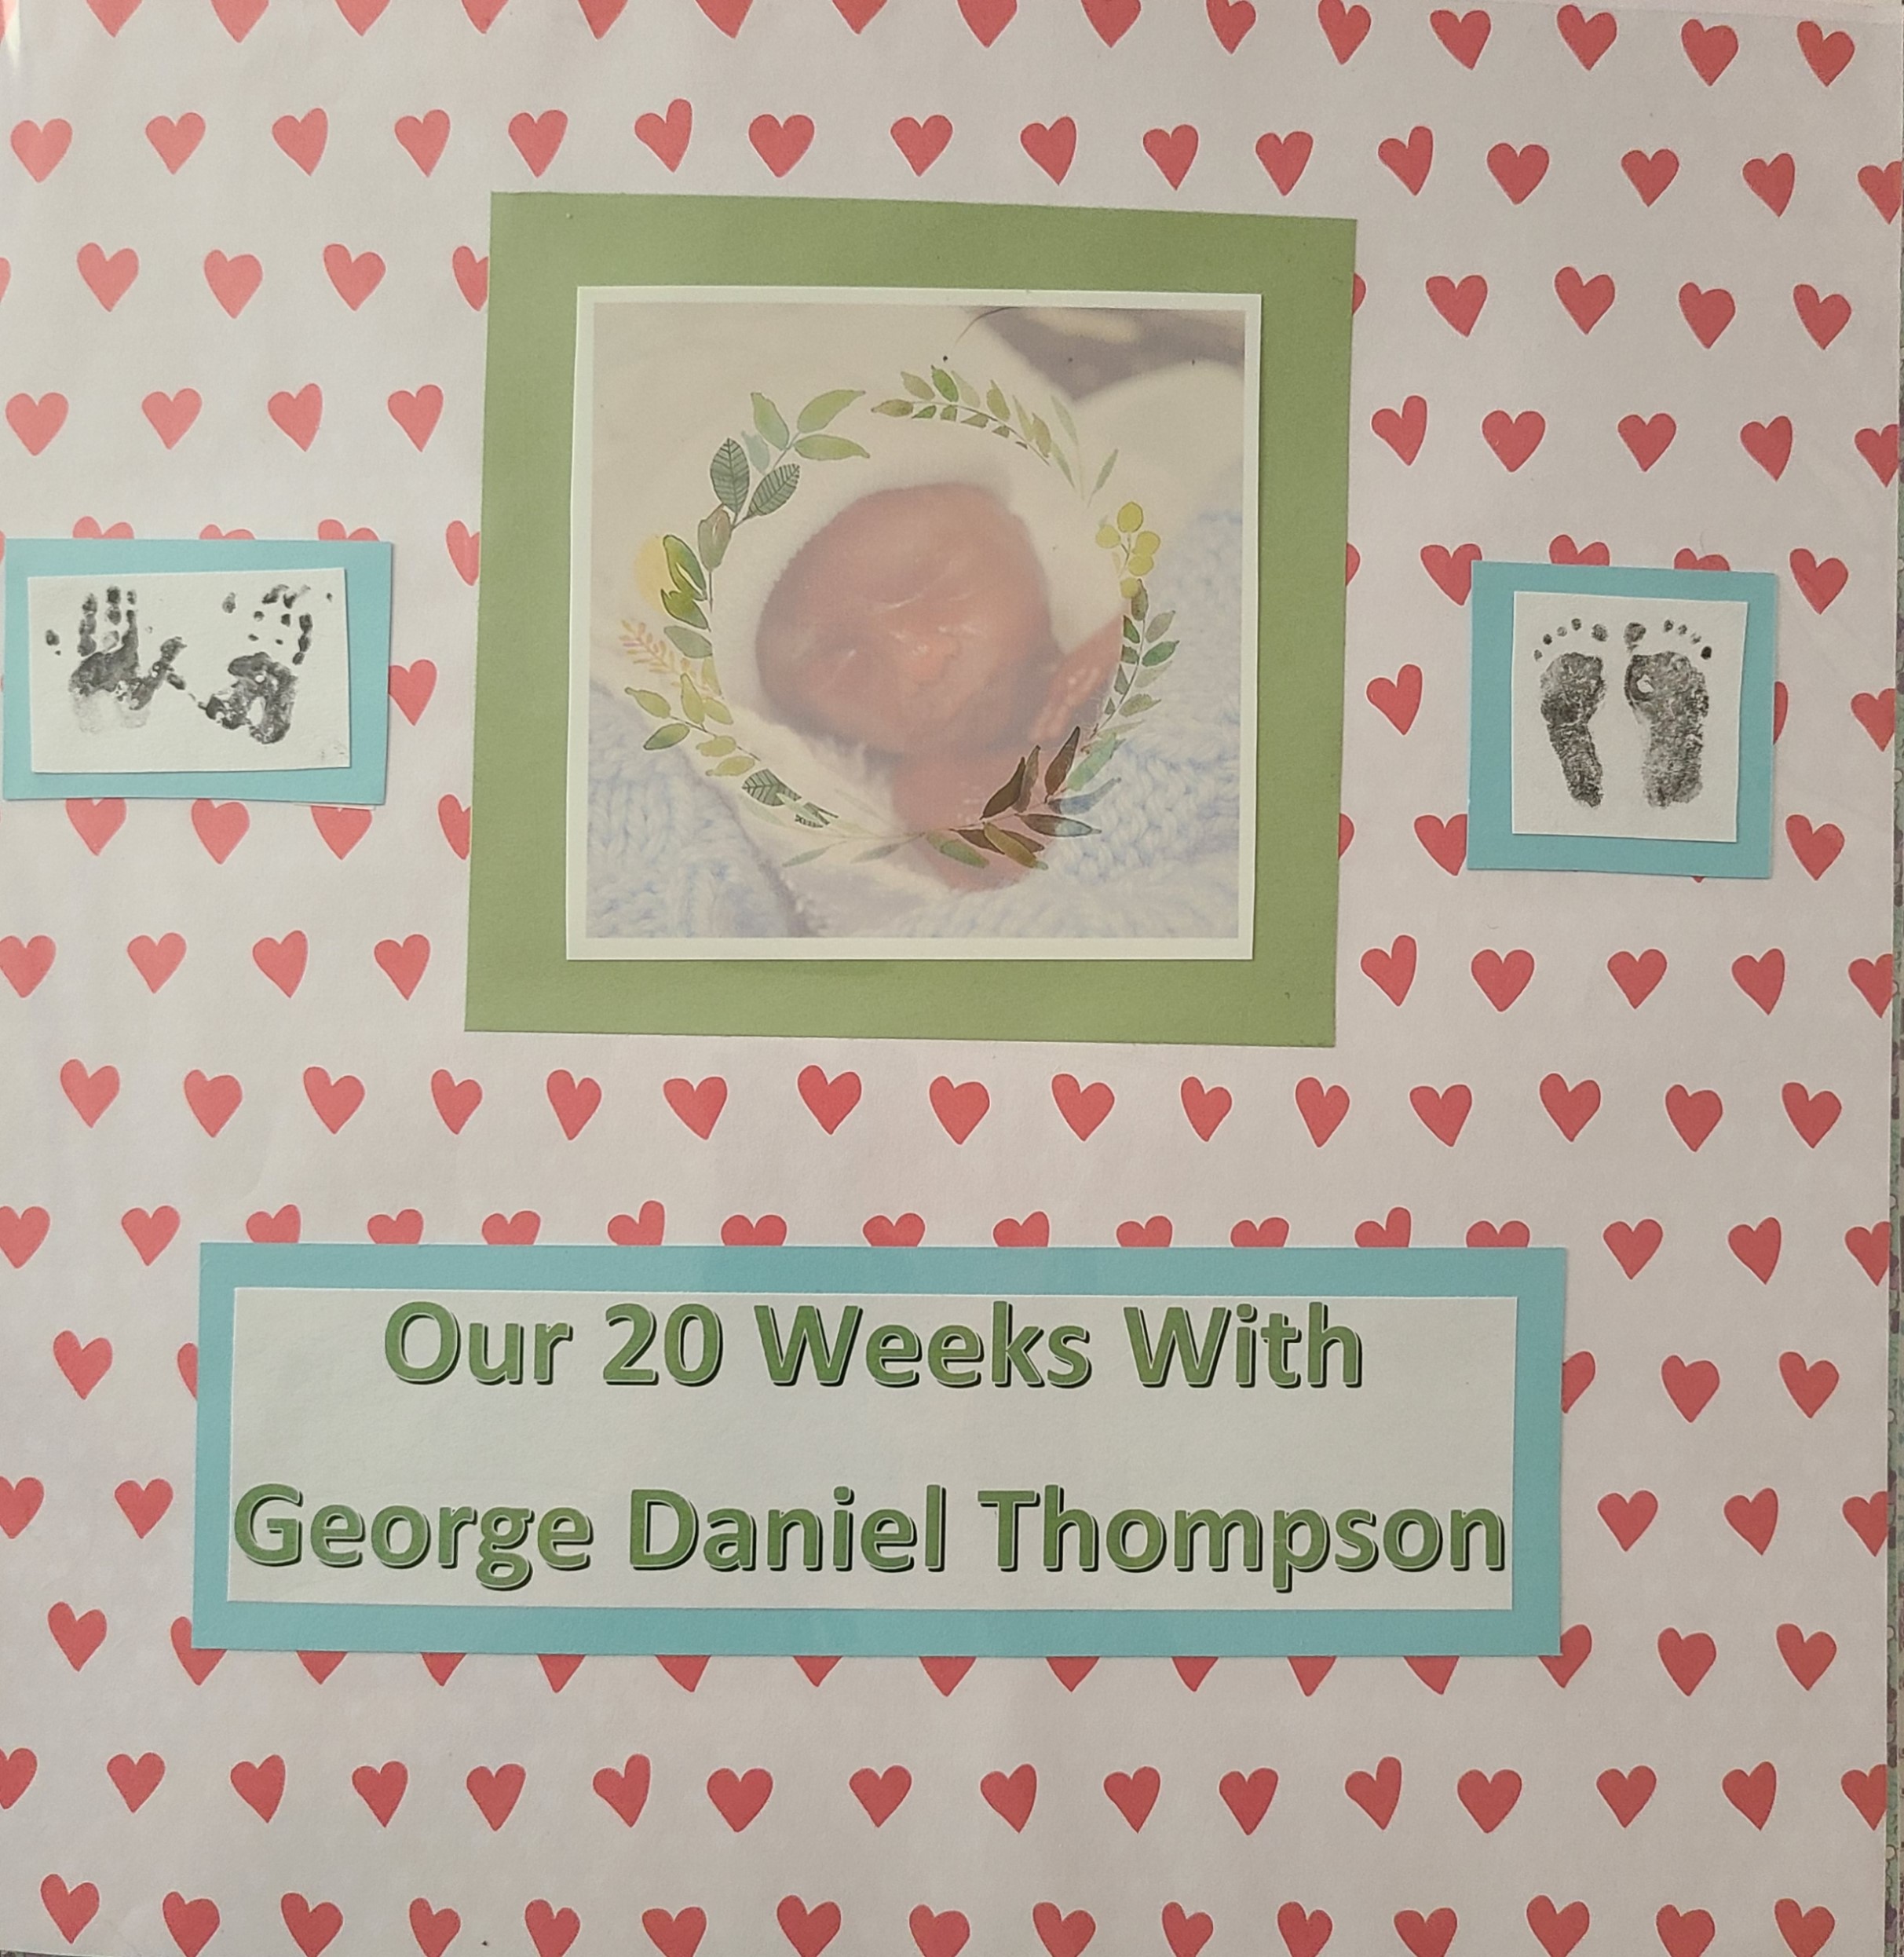 scrapbook cover with a central image of a tiny baby's head (in a small white knit cap) and hands, wrapped in a light blue blanket. To the right and left are tiny hand and footprints. Below is the title "Our 20 Weeks With George Daniel Thompson".